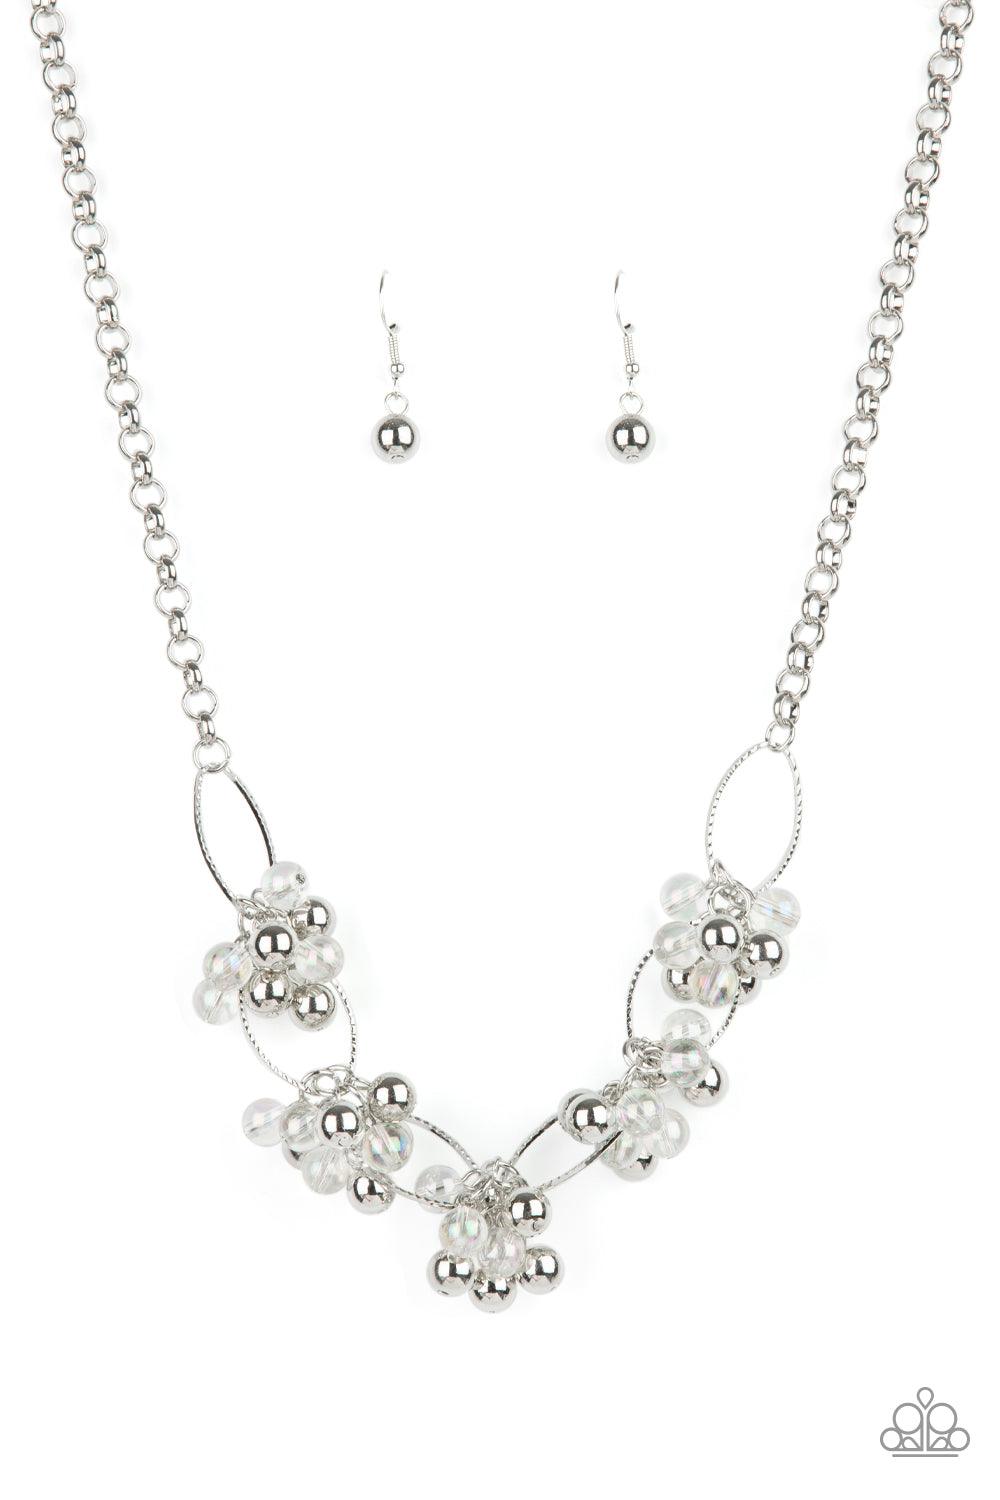 Paparazzi Accessories Effervescent Ensemble - Multi Clusters of glassy iridescent and shiny silver beads link with textured silver ovals, creating a bubbly effervescence below the collar. Features an adjustable clasp closure. Sold as one individual neckla